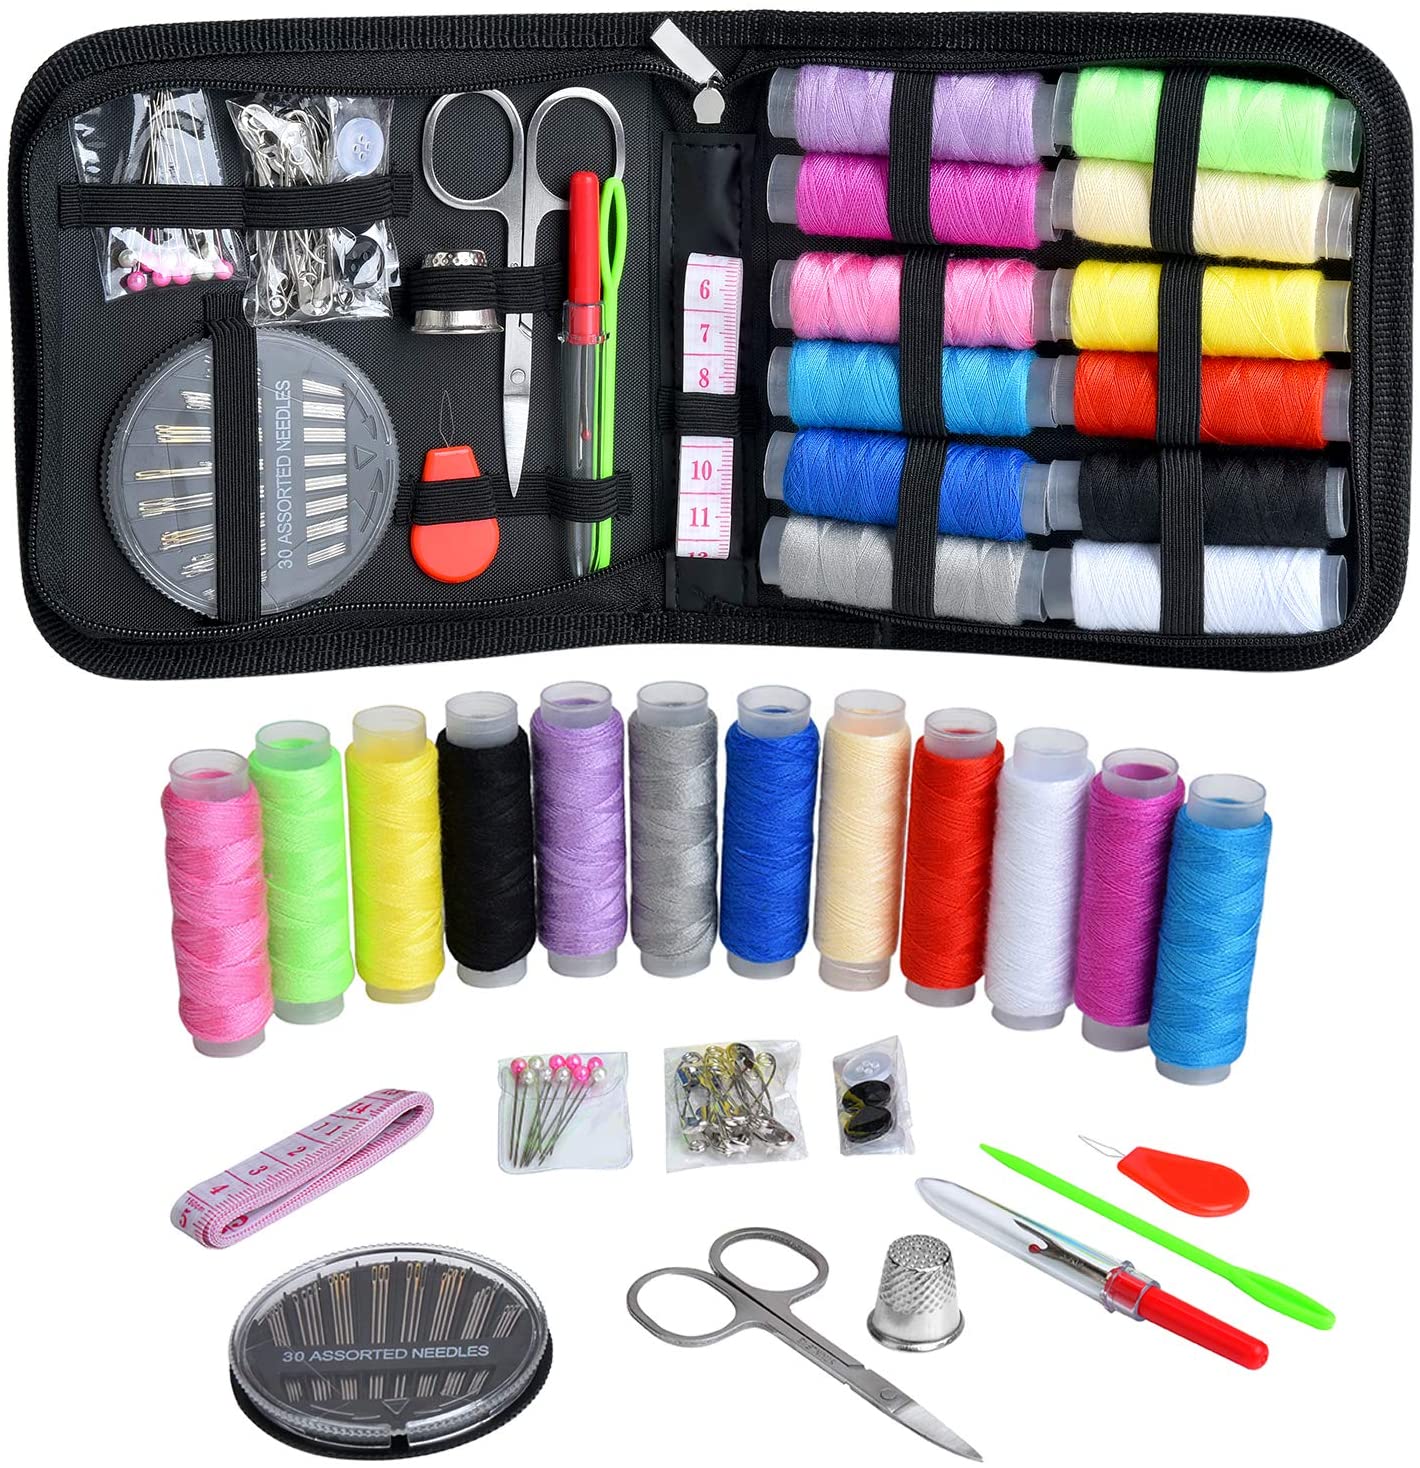 Sewing Kit Includes 98 Pieces Portable Sewing Kit Hand Sewing Kit